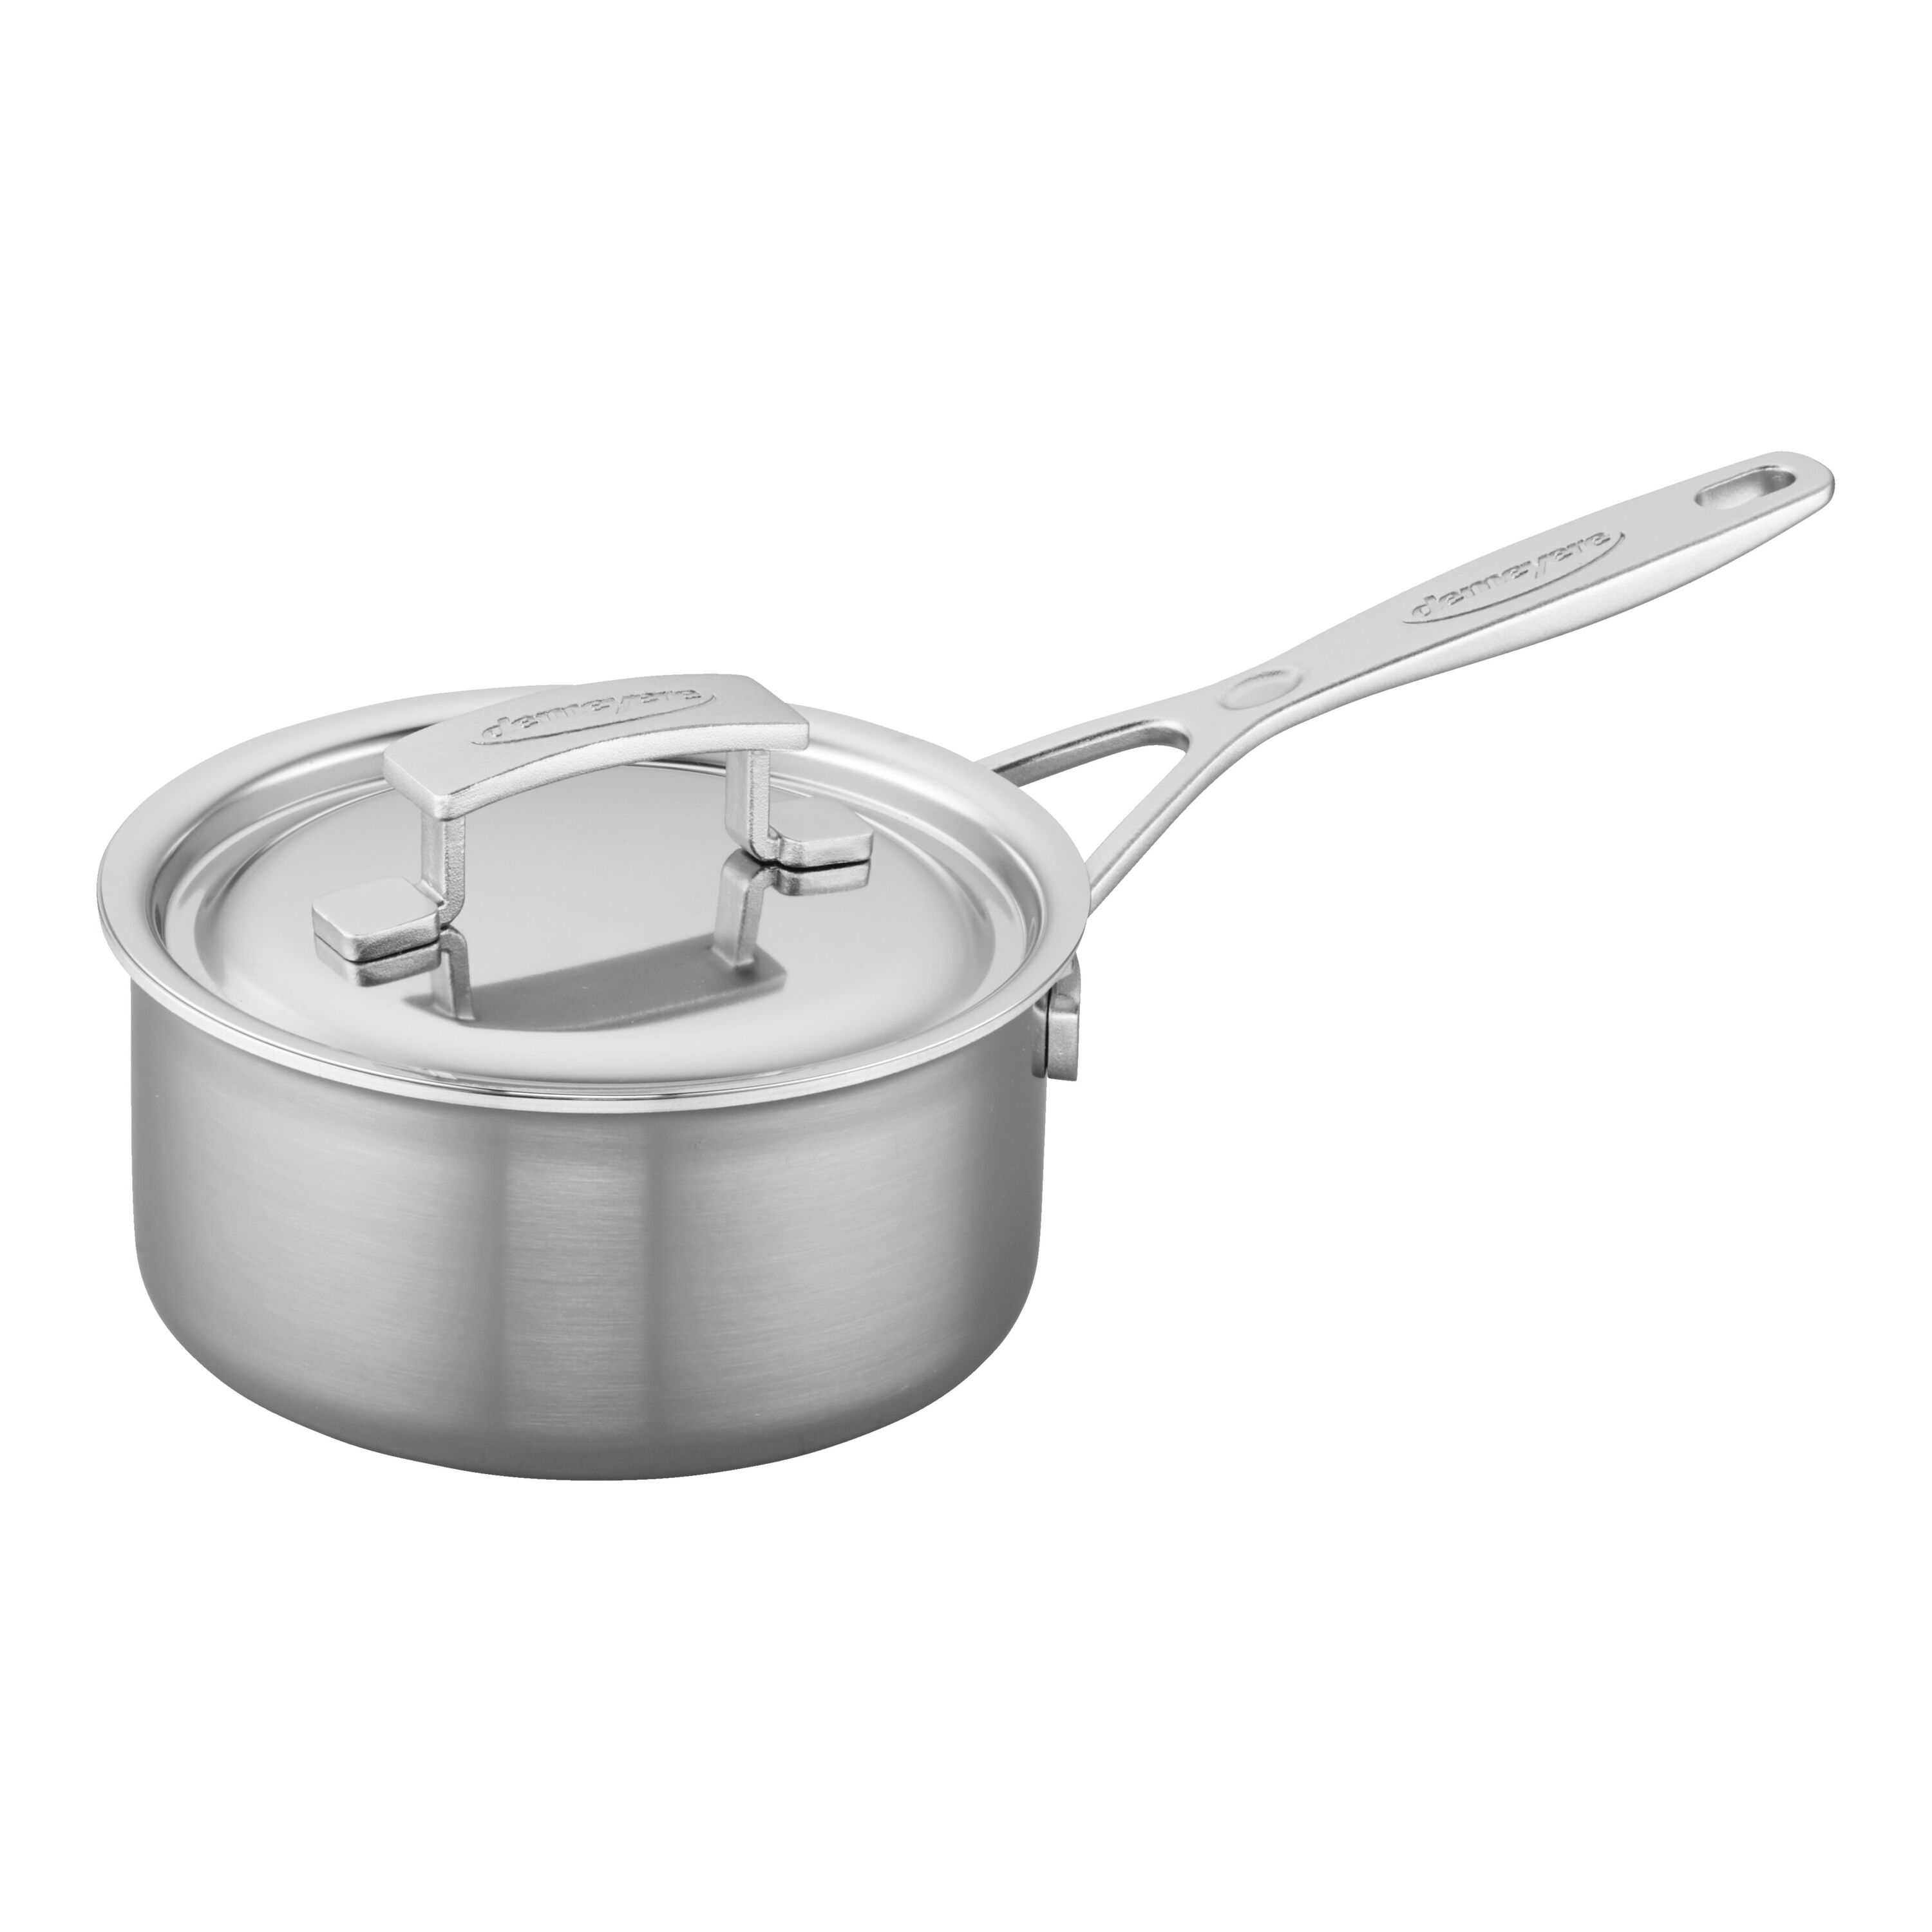 ZWILLING Commercial 12-qt Stainless Steel Sauce Pot without a Lid